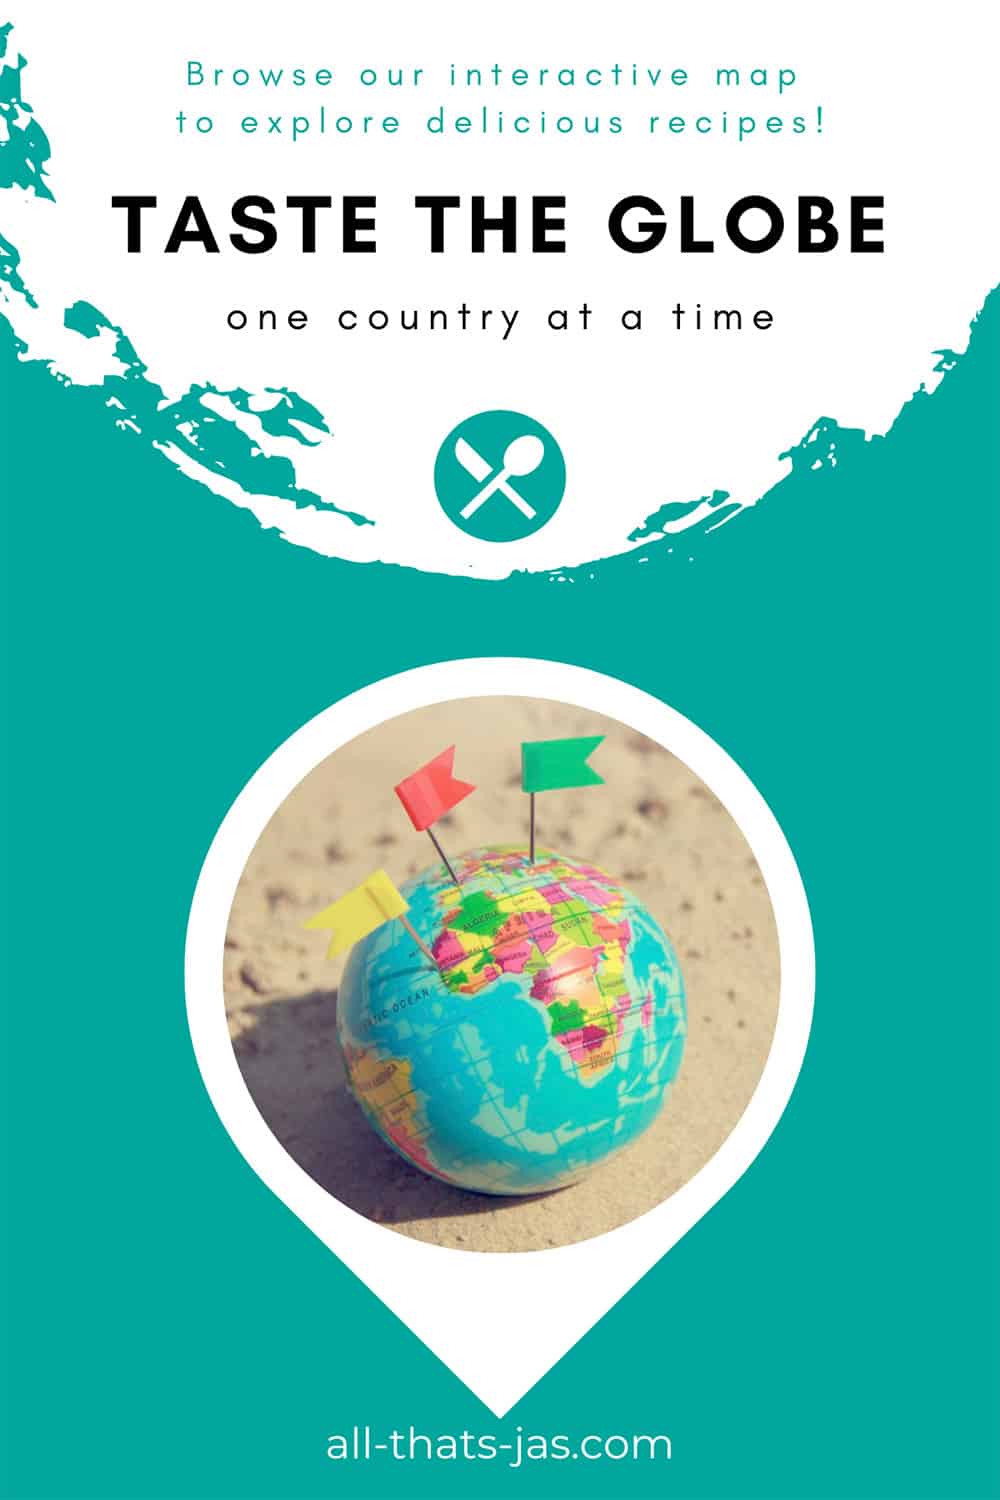 A poster for interactive taste map with globe.